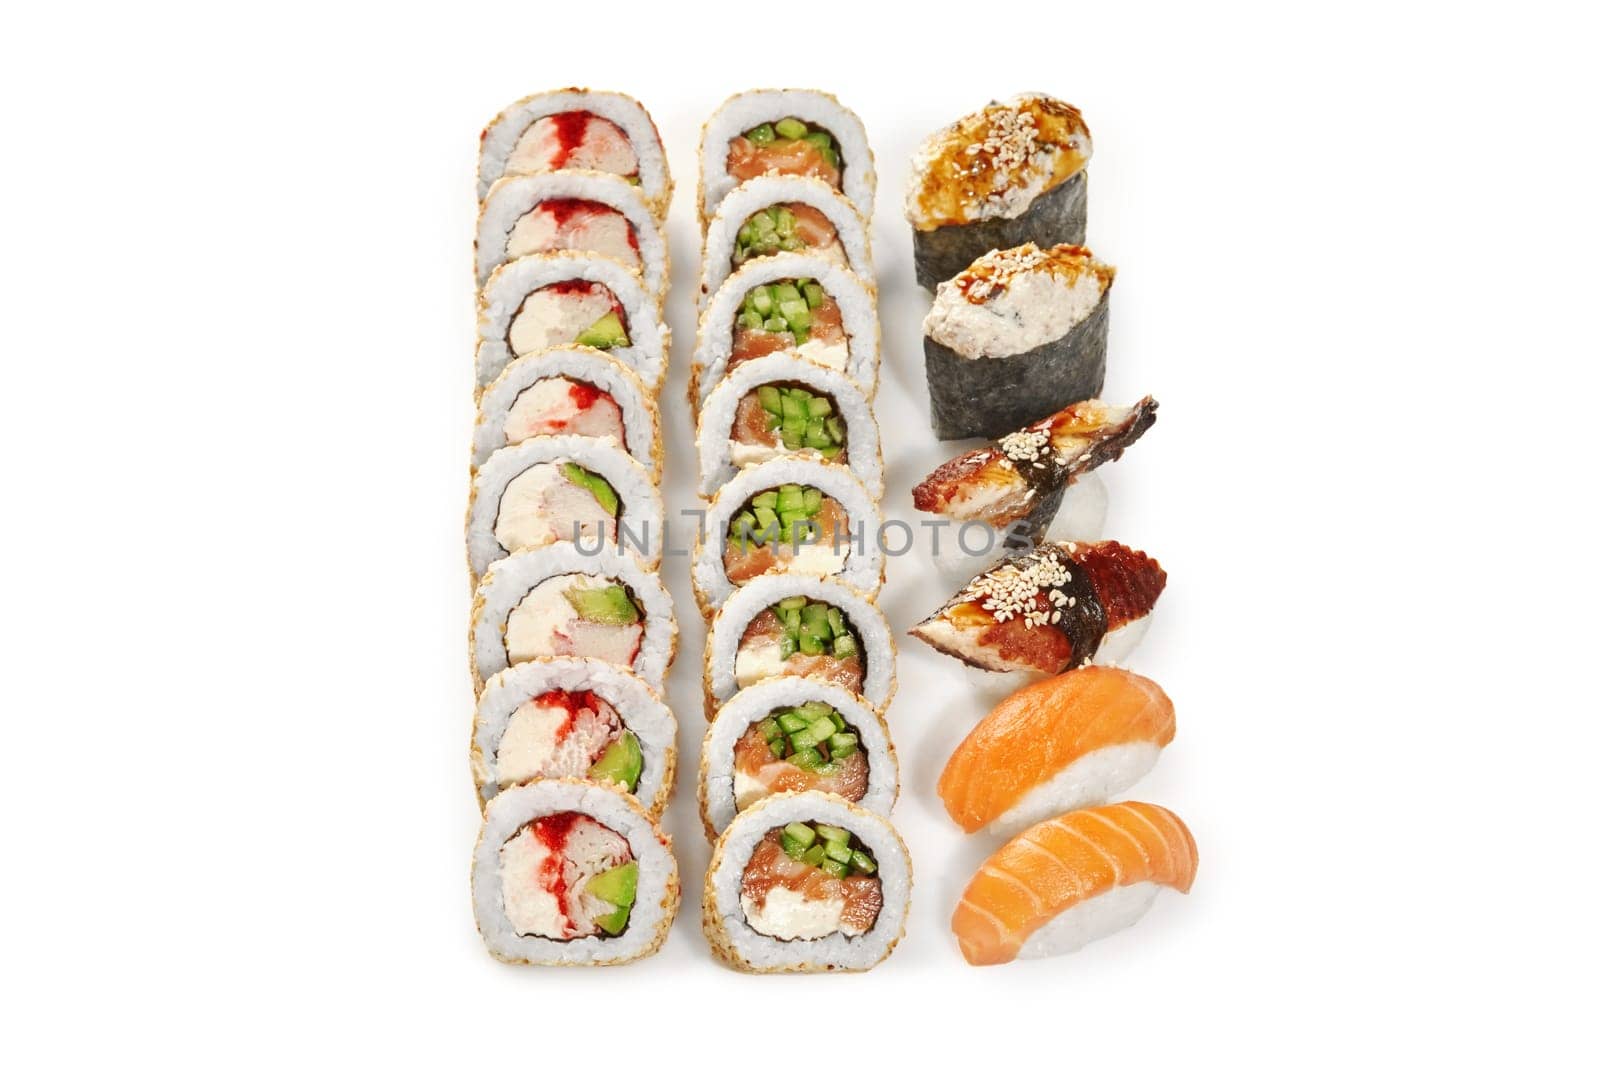 Delicious sushi set for two of classic sesame coated uramaki rolls, nigirizushi and gunkan maki with salmon and eel drizzled with unagi sauce, isolated on white Japanese cuisine